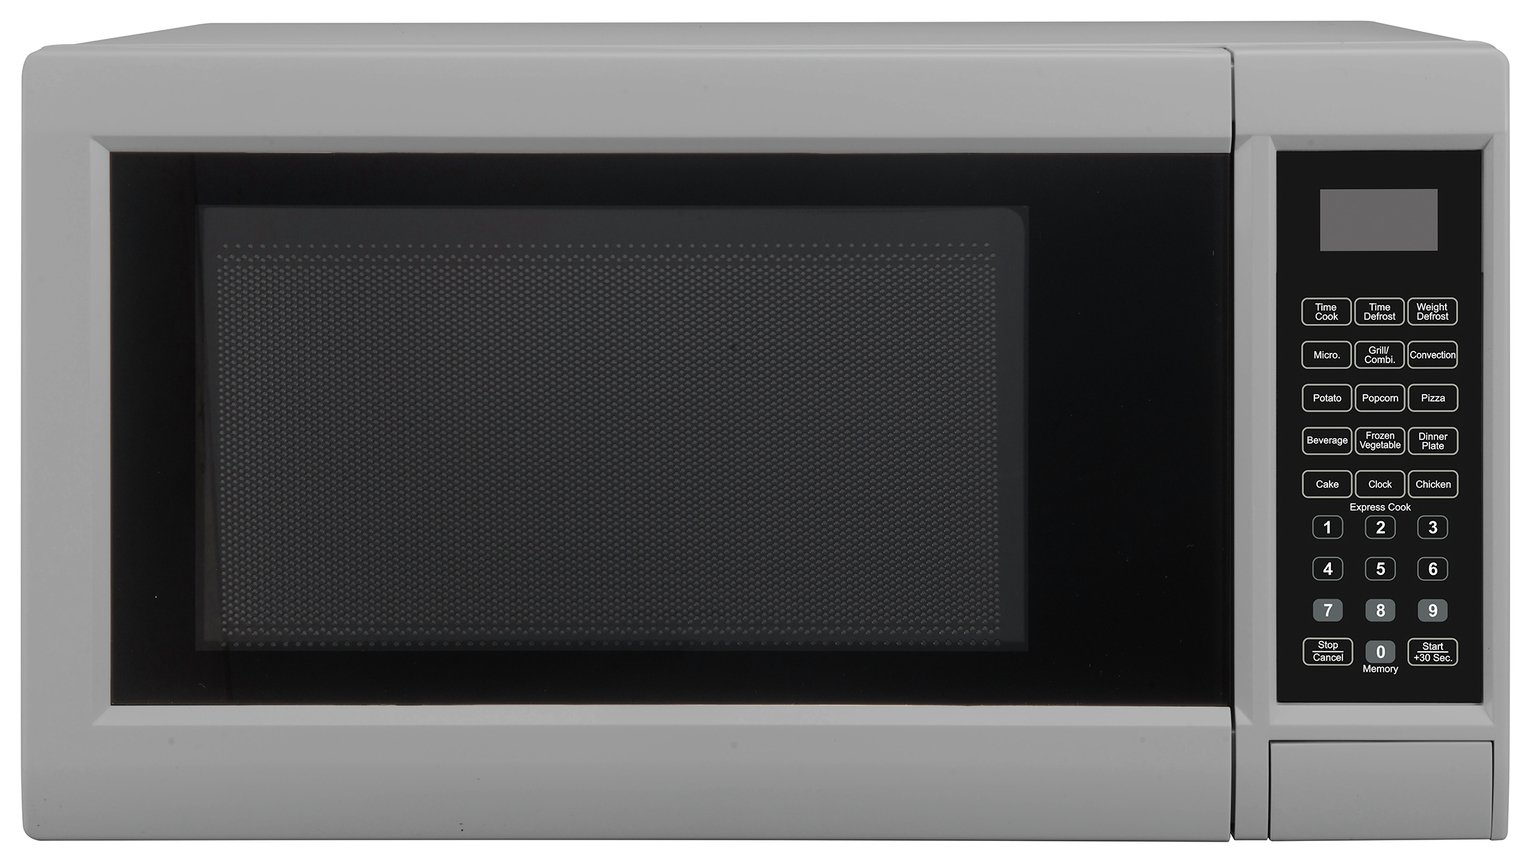 Morphy Richards 900W Combination Microwave D90D - Silver